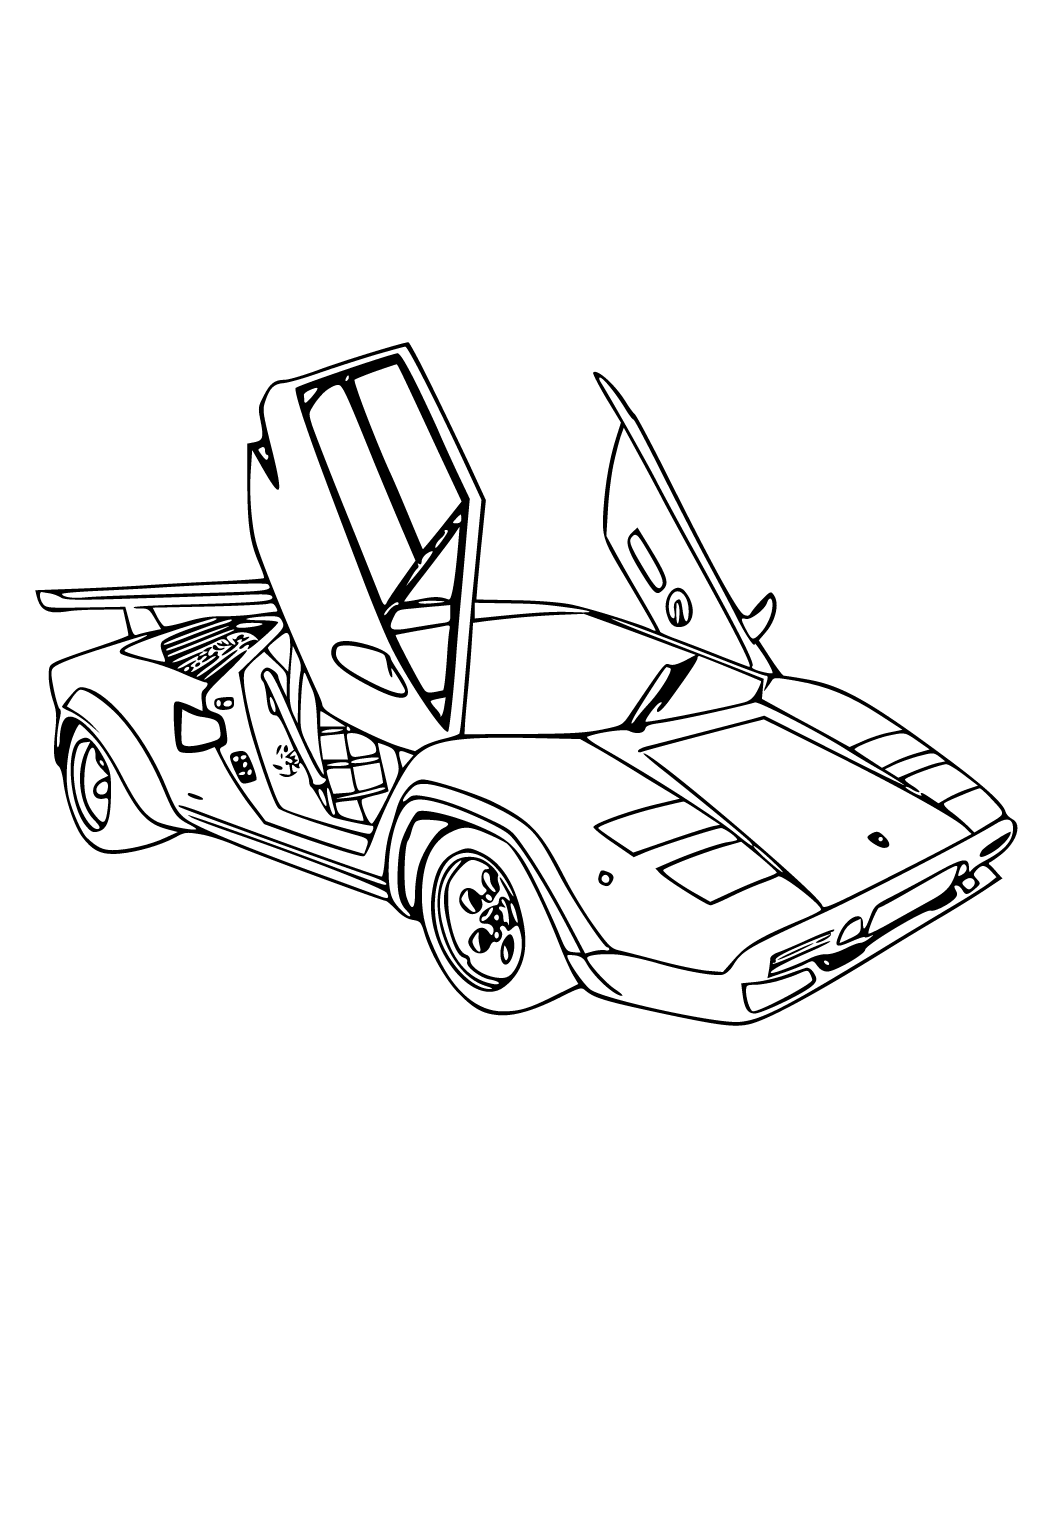 Free Printable Car Race Coloring Page, Sheet and Picture for Adults and  Kids (Girls and Boys) - Babeled.com